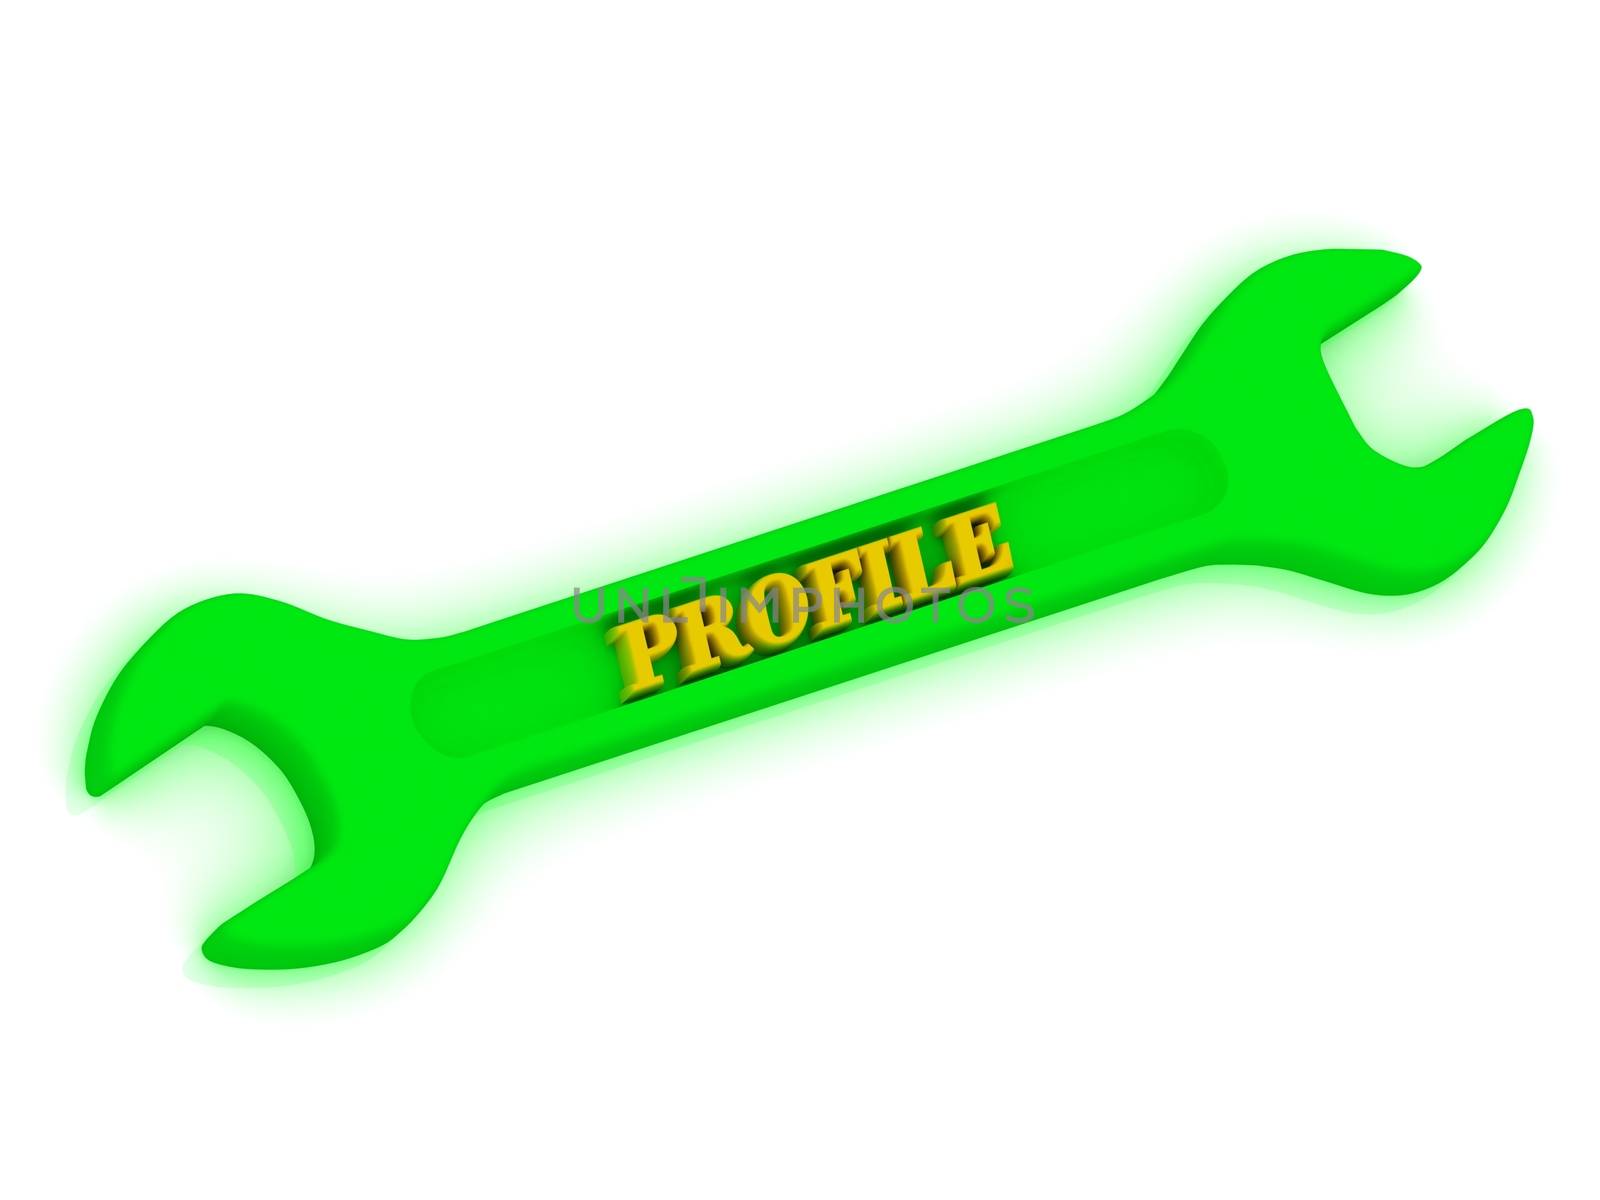 PROFILE span Inscription bright volume letter on metallic building spanner green colour. Isolated on white background